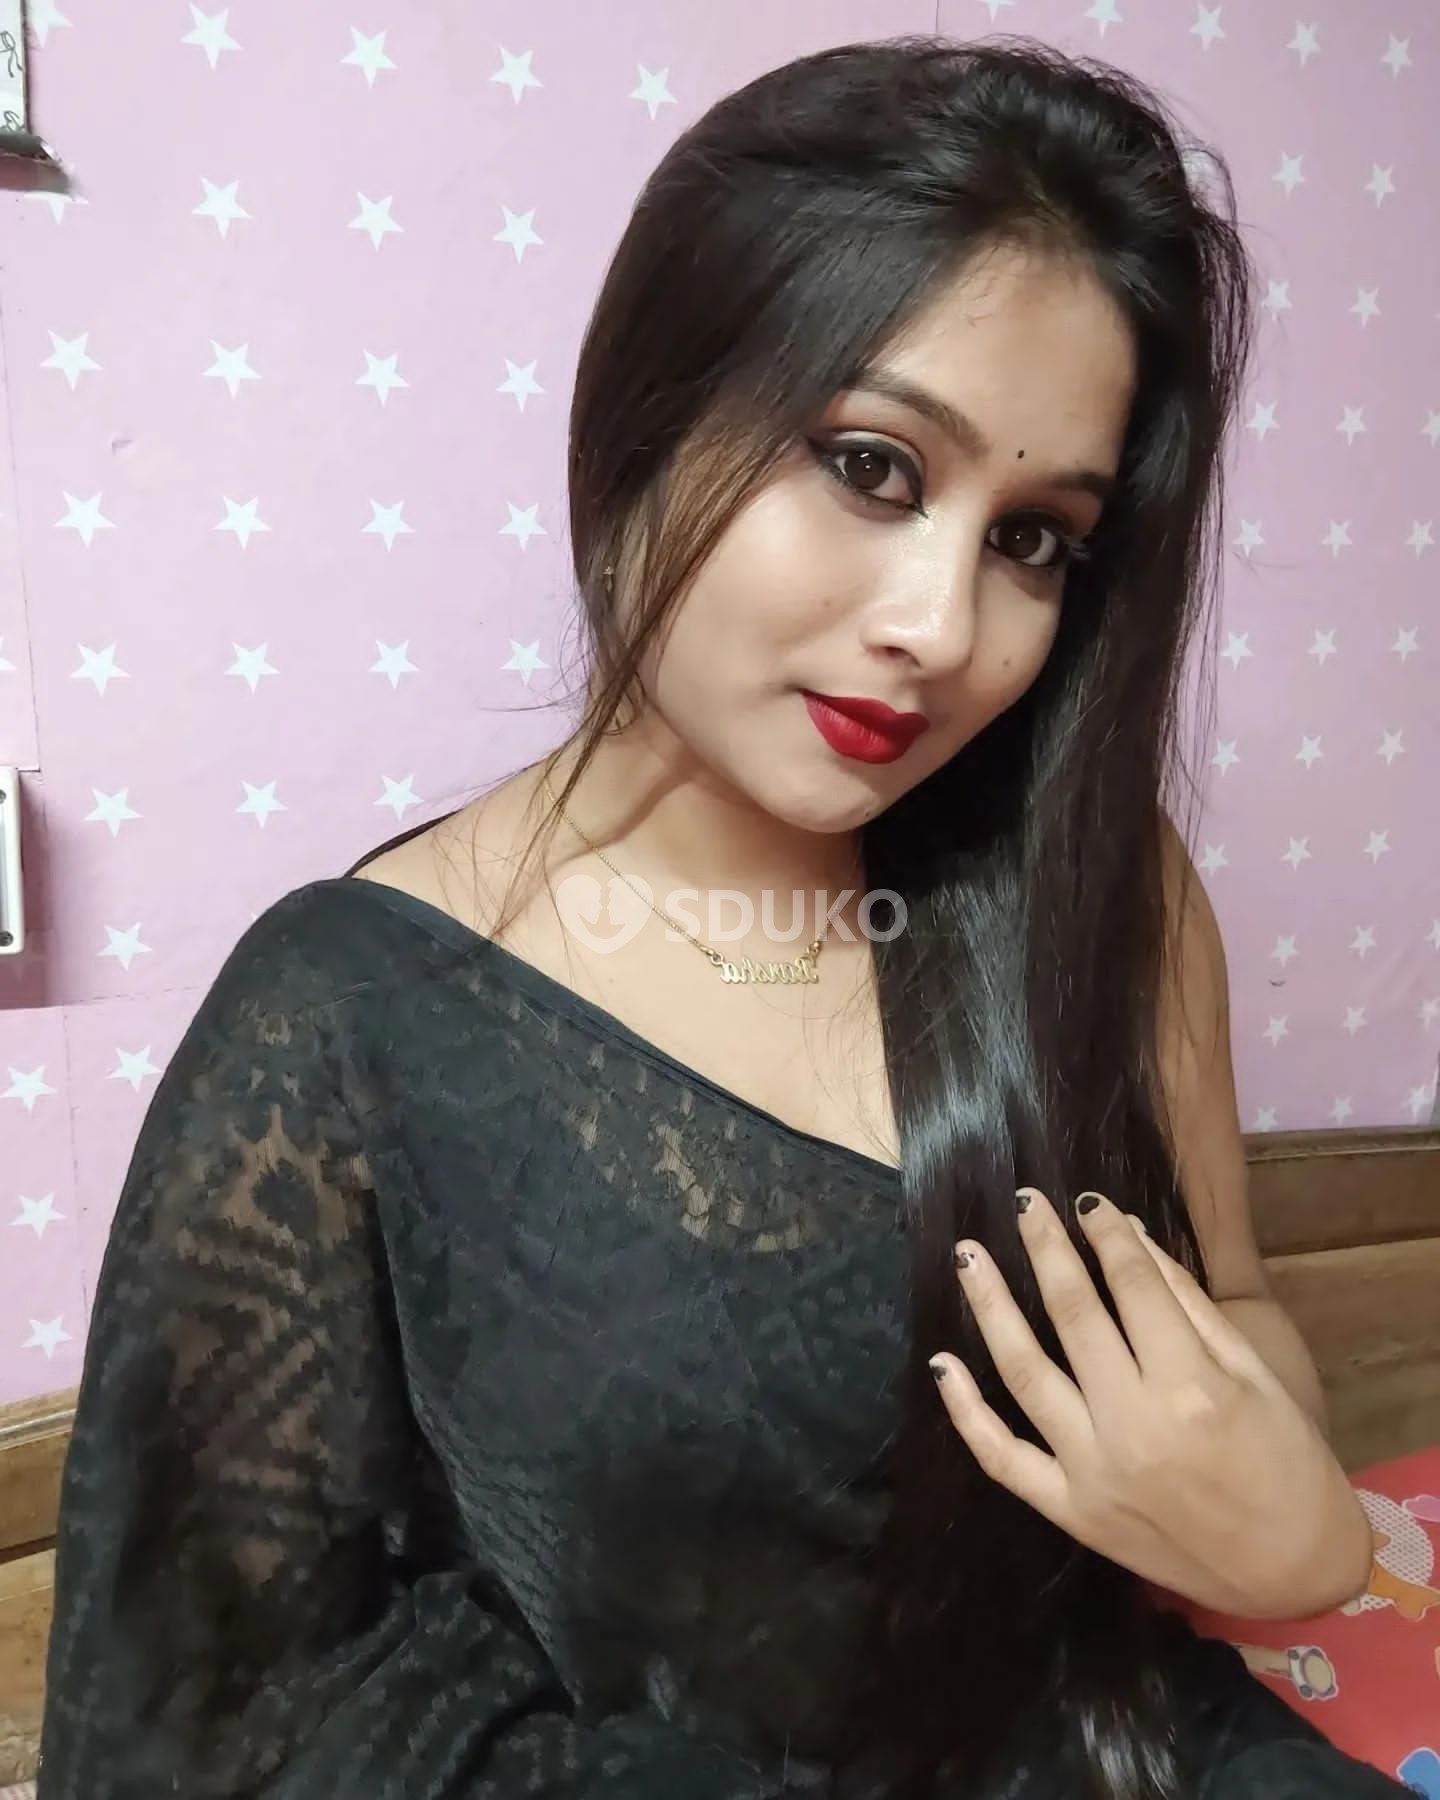 Ranchi//-*🆑 TODAY LOW PRICE 100% SAFE AND SECURE GENUINE CALL GIRL AFFORDABLE PRICE CALL NOW 24/7 AVAILABLE ANYTIME C